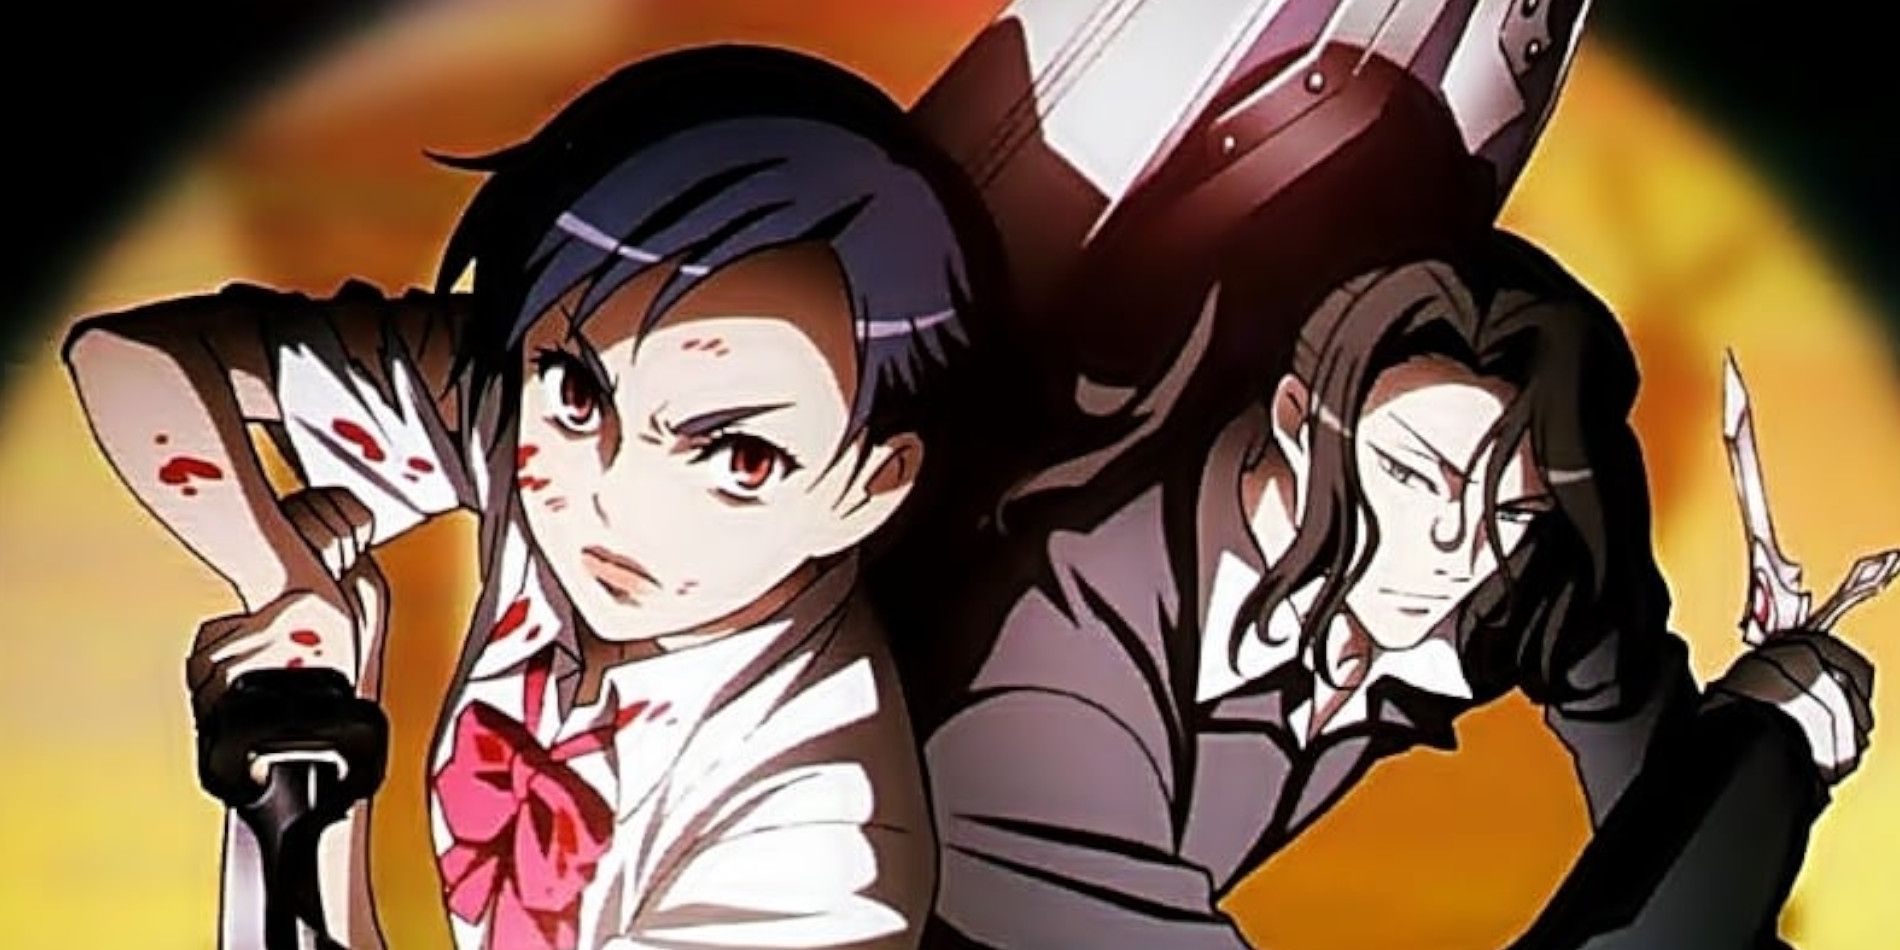 Hagi and Saya with blood on her clothes and face from Blood+ in fighting poses.